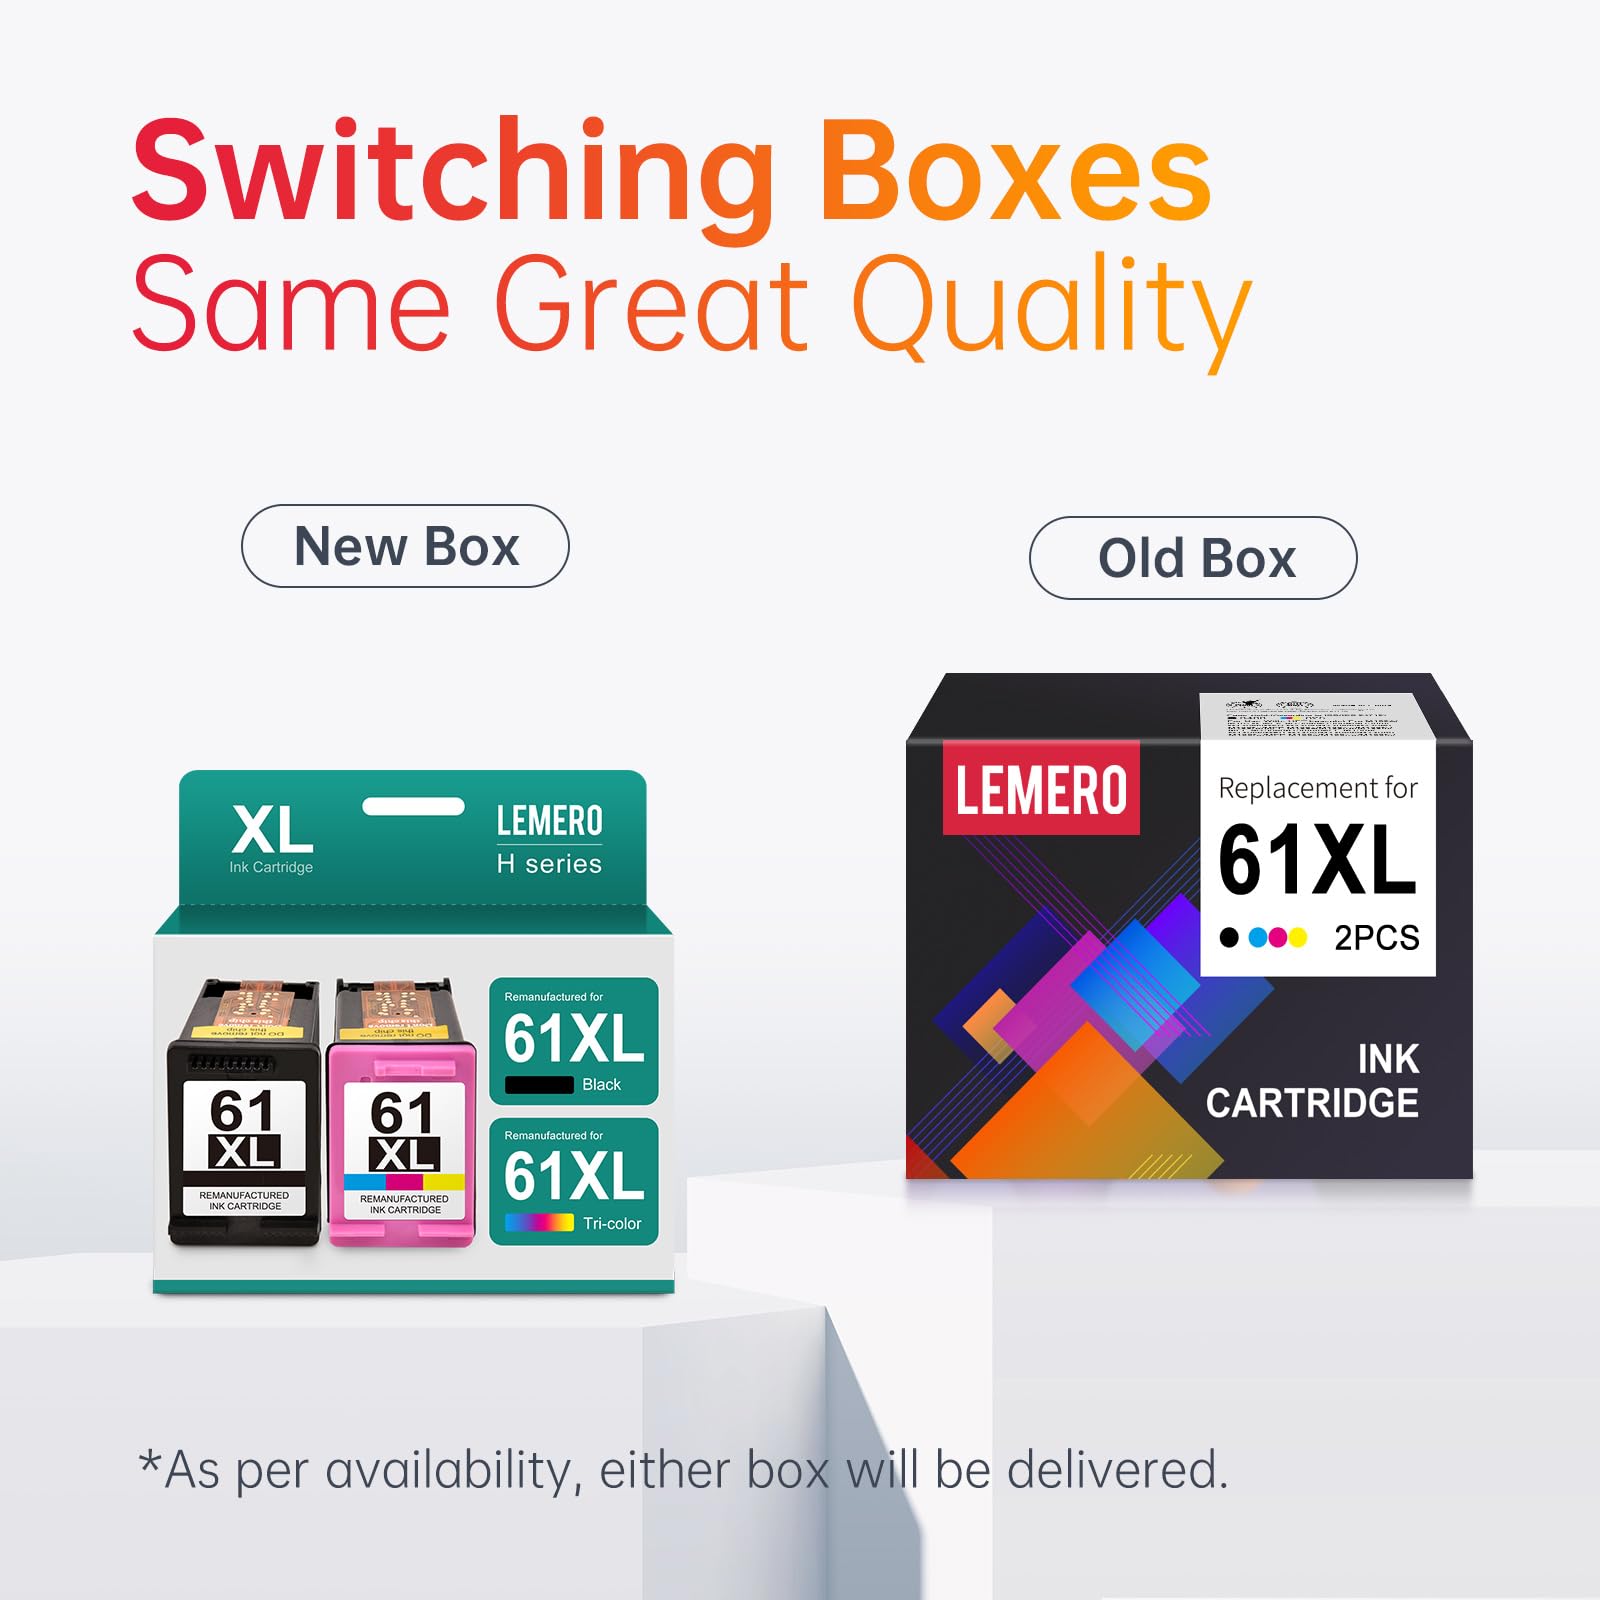 HP 61XL Ink Cartridges: "Switching boxes announcement for LEMERO HP 61XL ink cartridges showcasing the transition from old to new packaging, emphasizing maintained quality with two cartridge packs, one black and one tri-color.